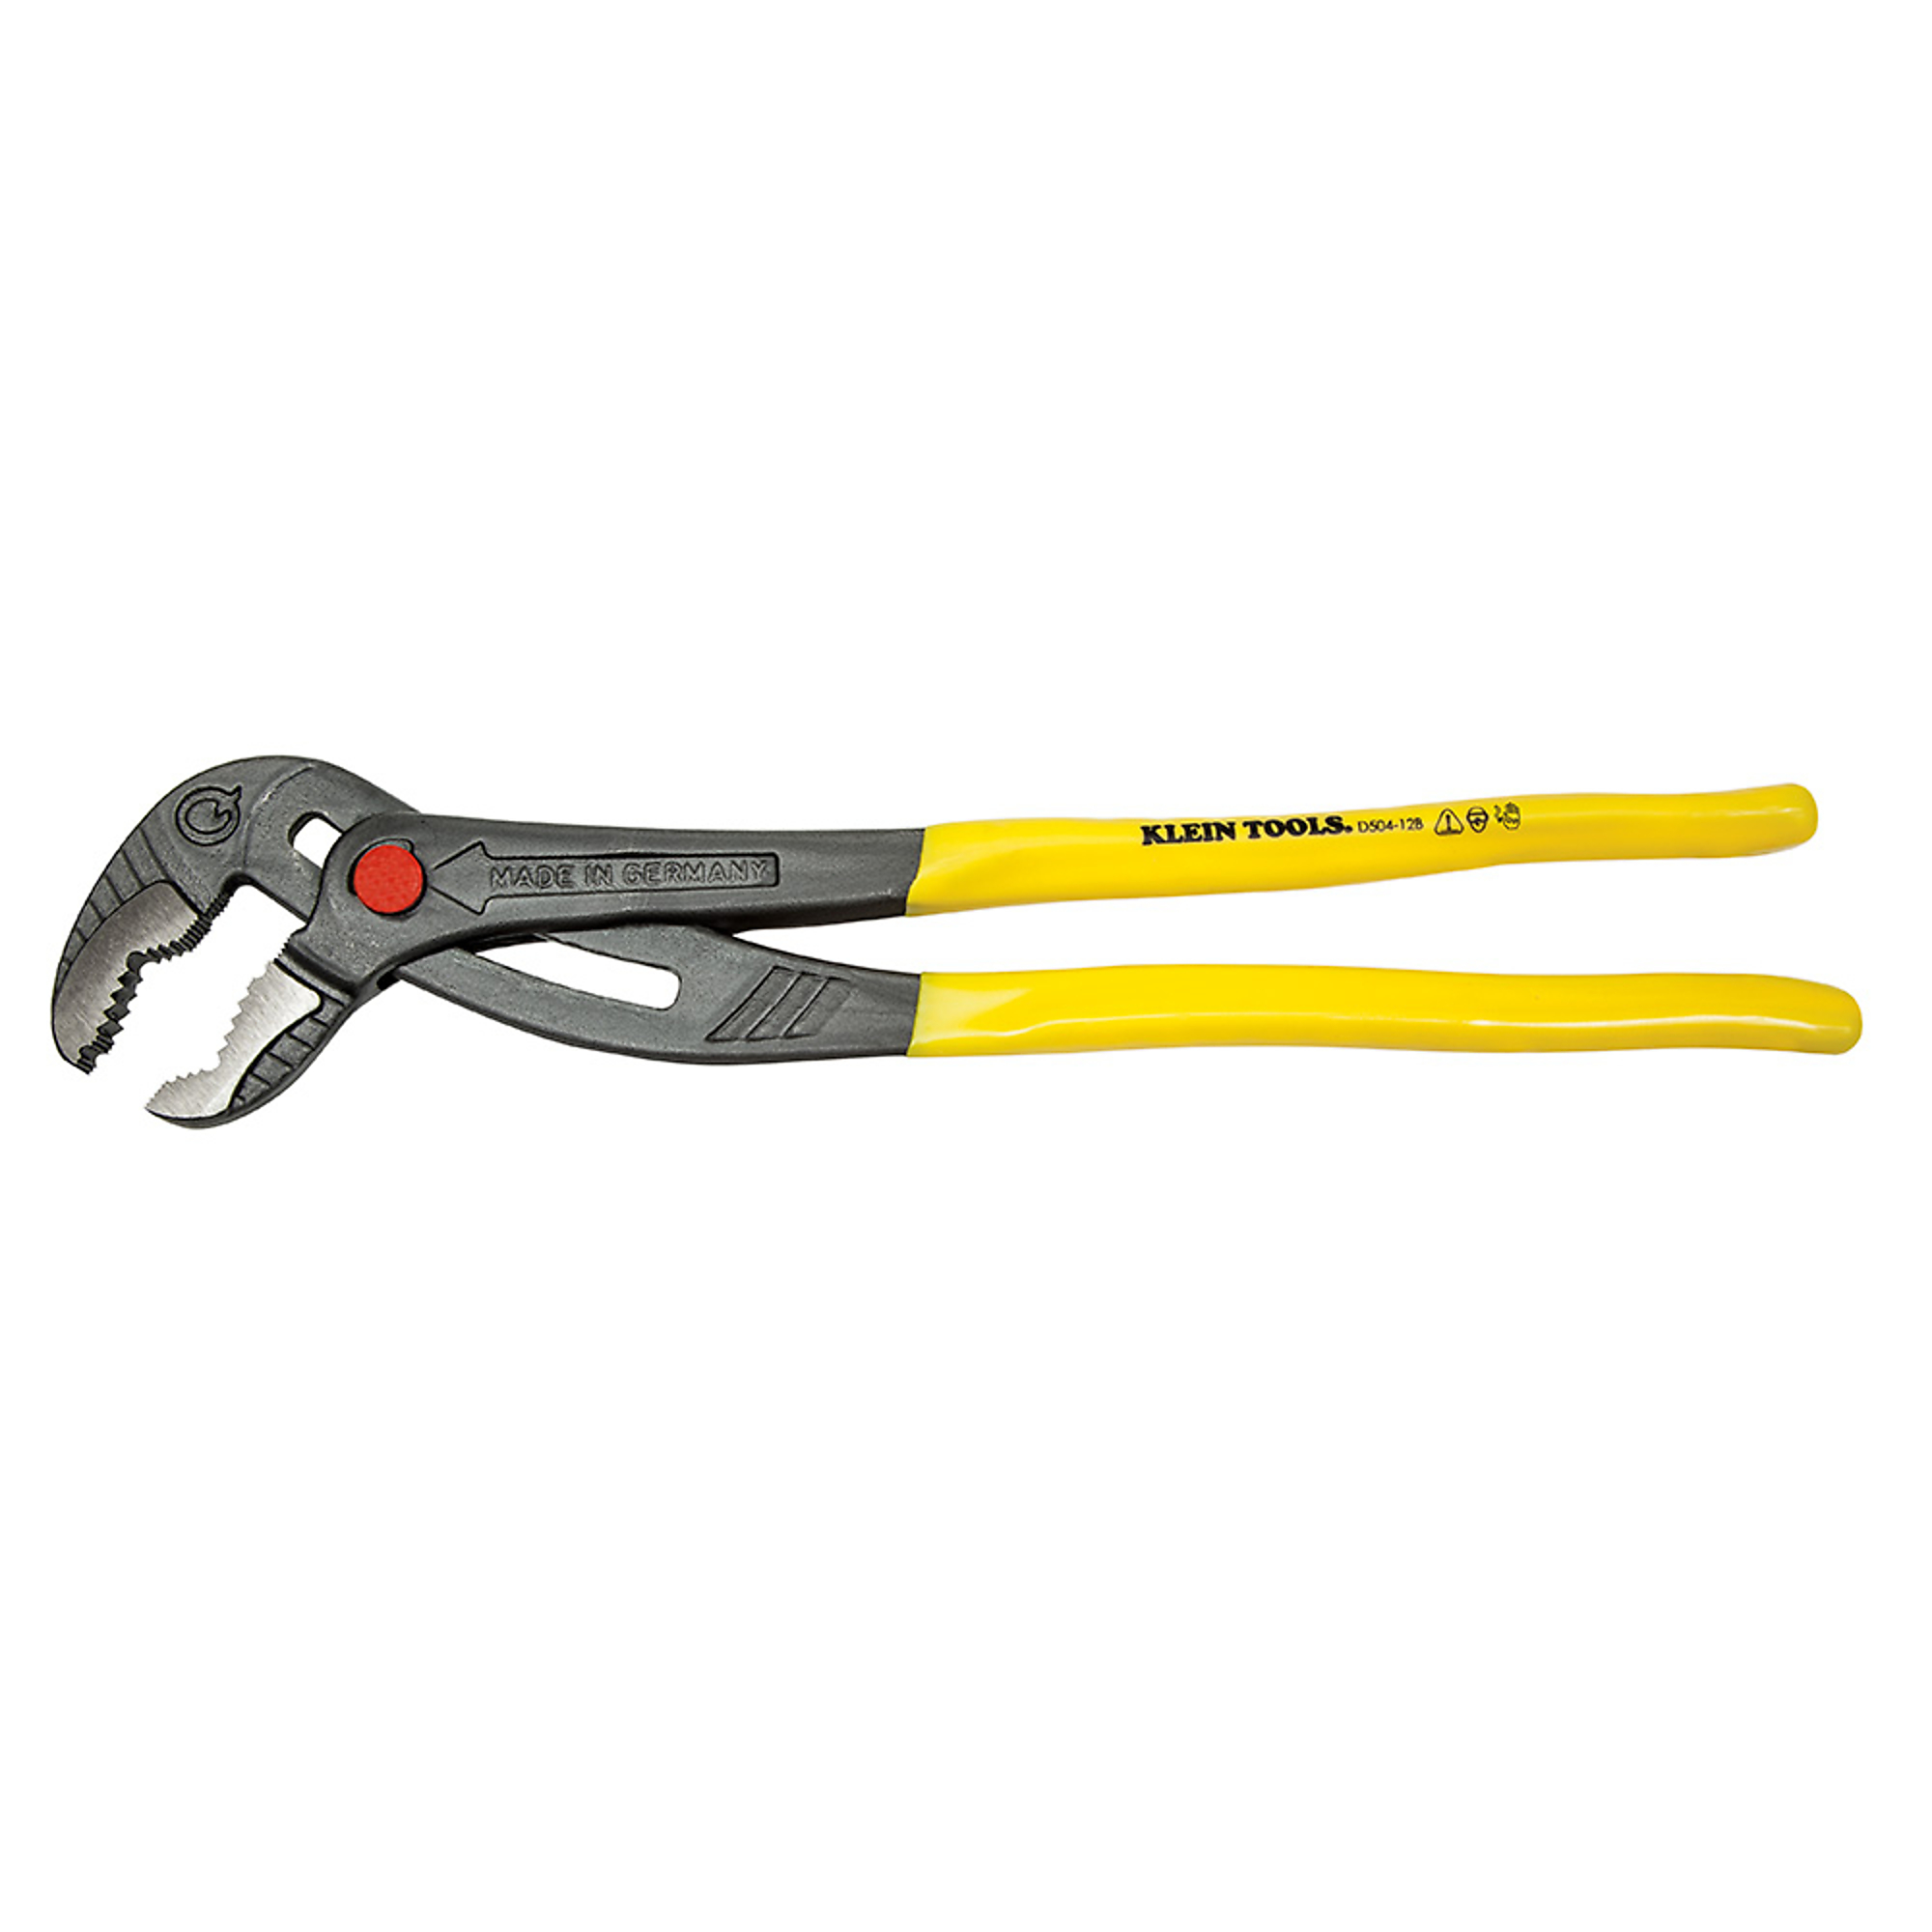 Klein Tools Klaw , 12Inch Quick-Adjust Klaw Pump Pliers, Pieces (qty.) 1 Material Steel, Jaw Capacity 2.75 in, Model D504-12B